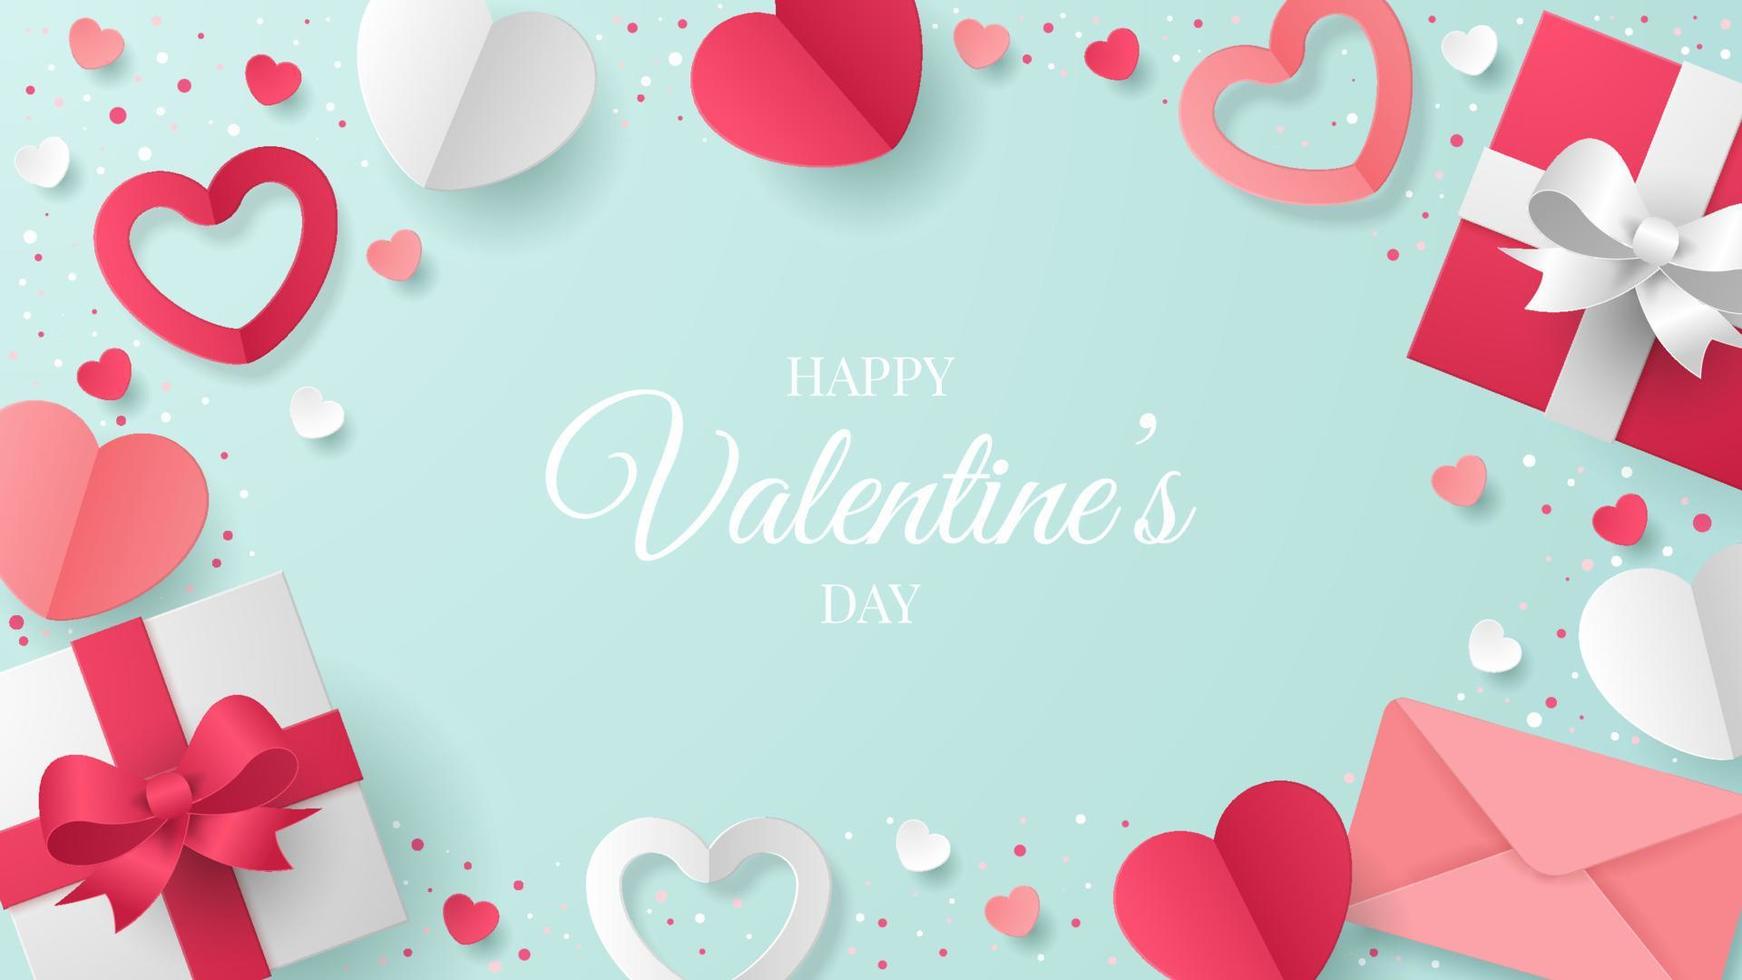 Valentine's day background with paper art style. Vector illustration.